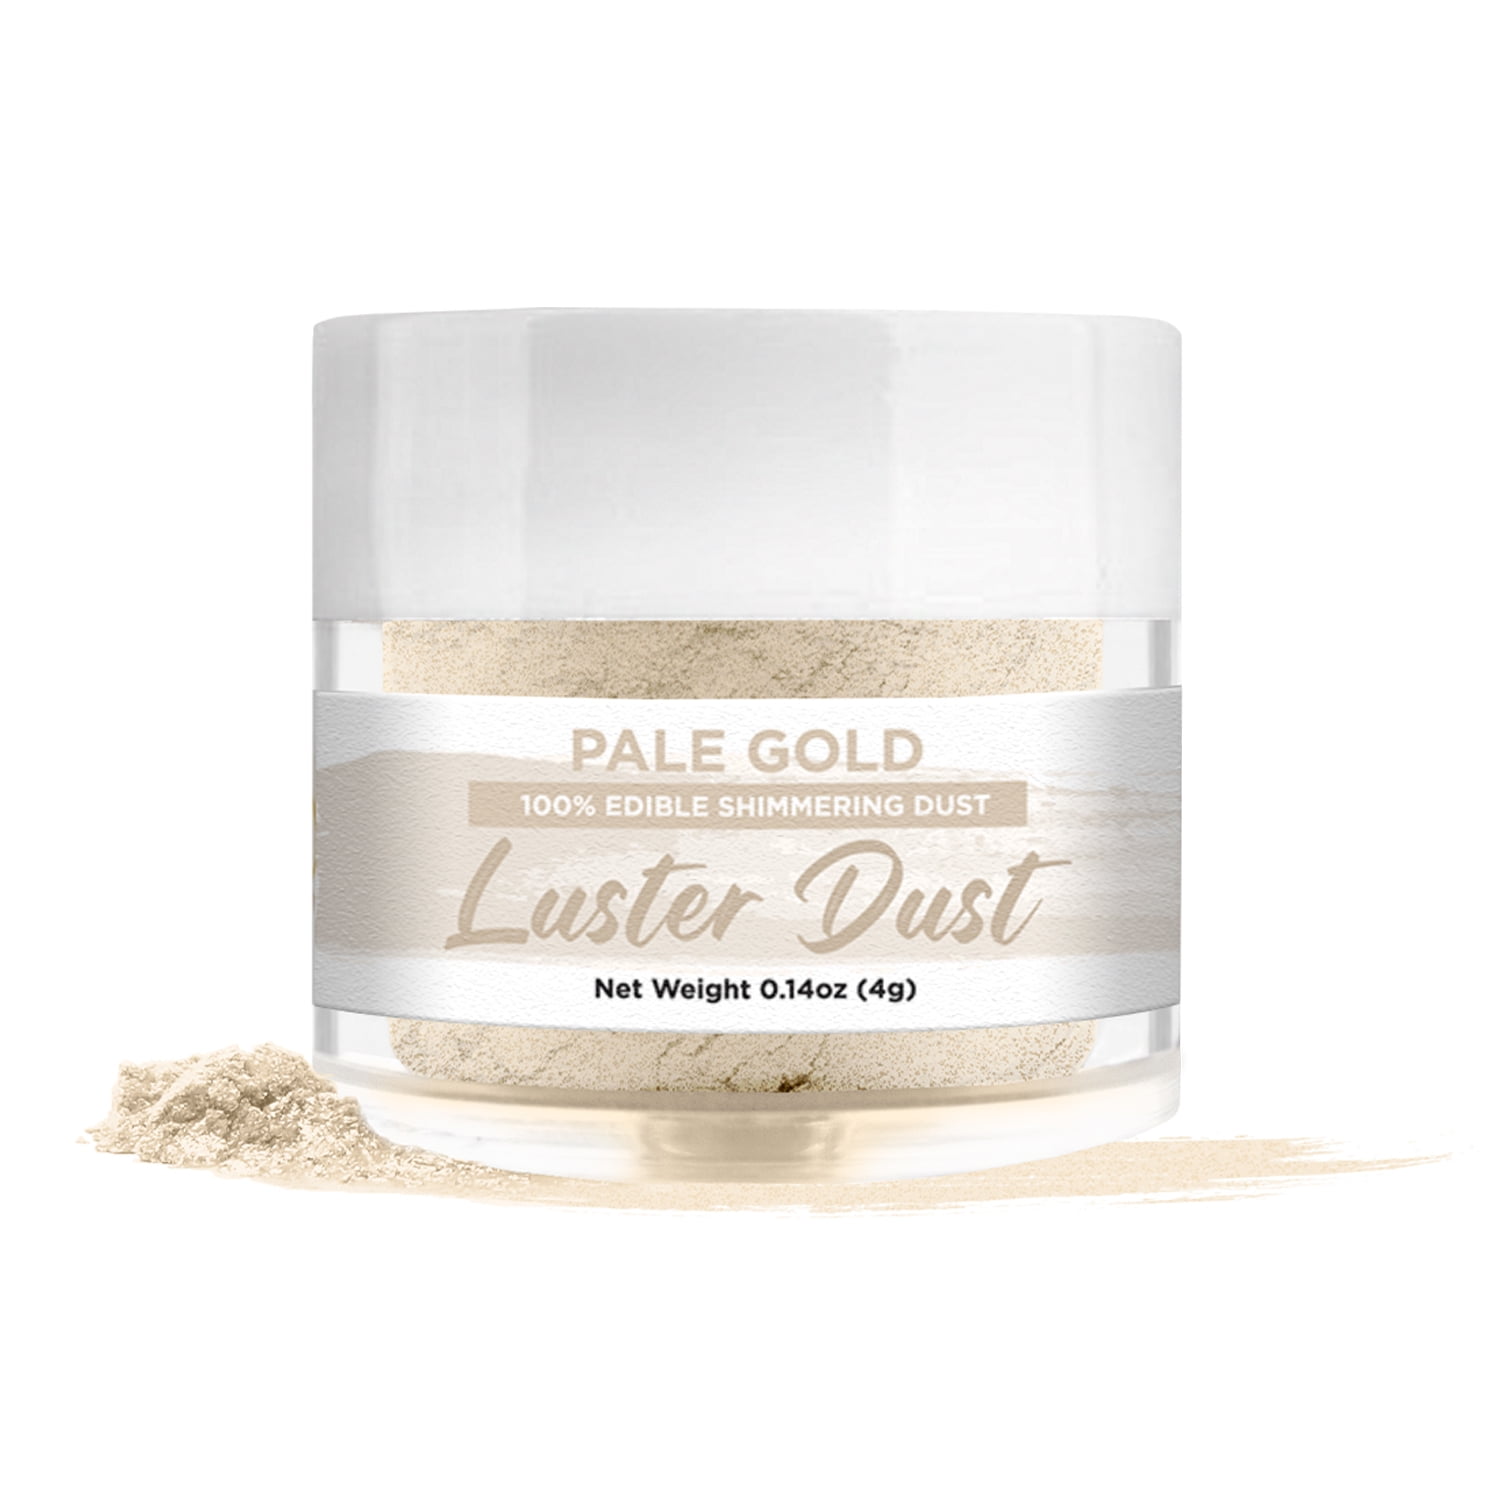 What Is Luster Dust?